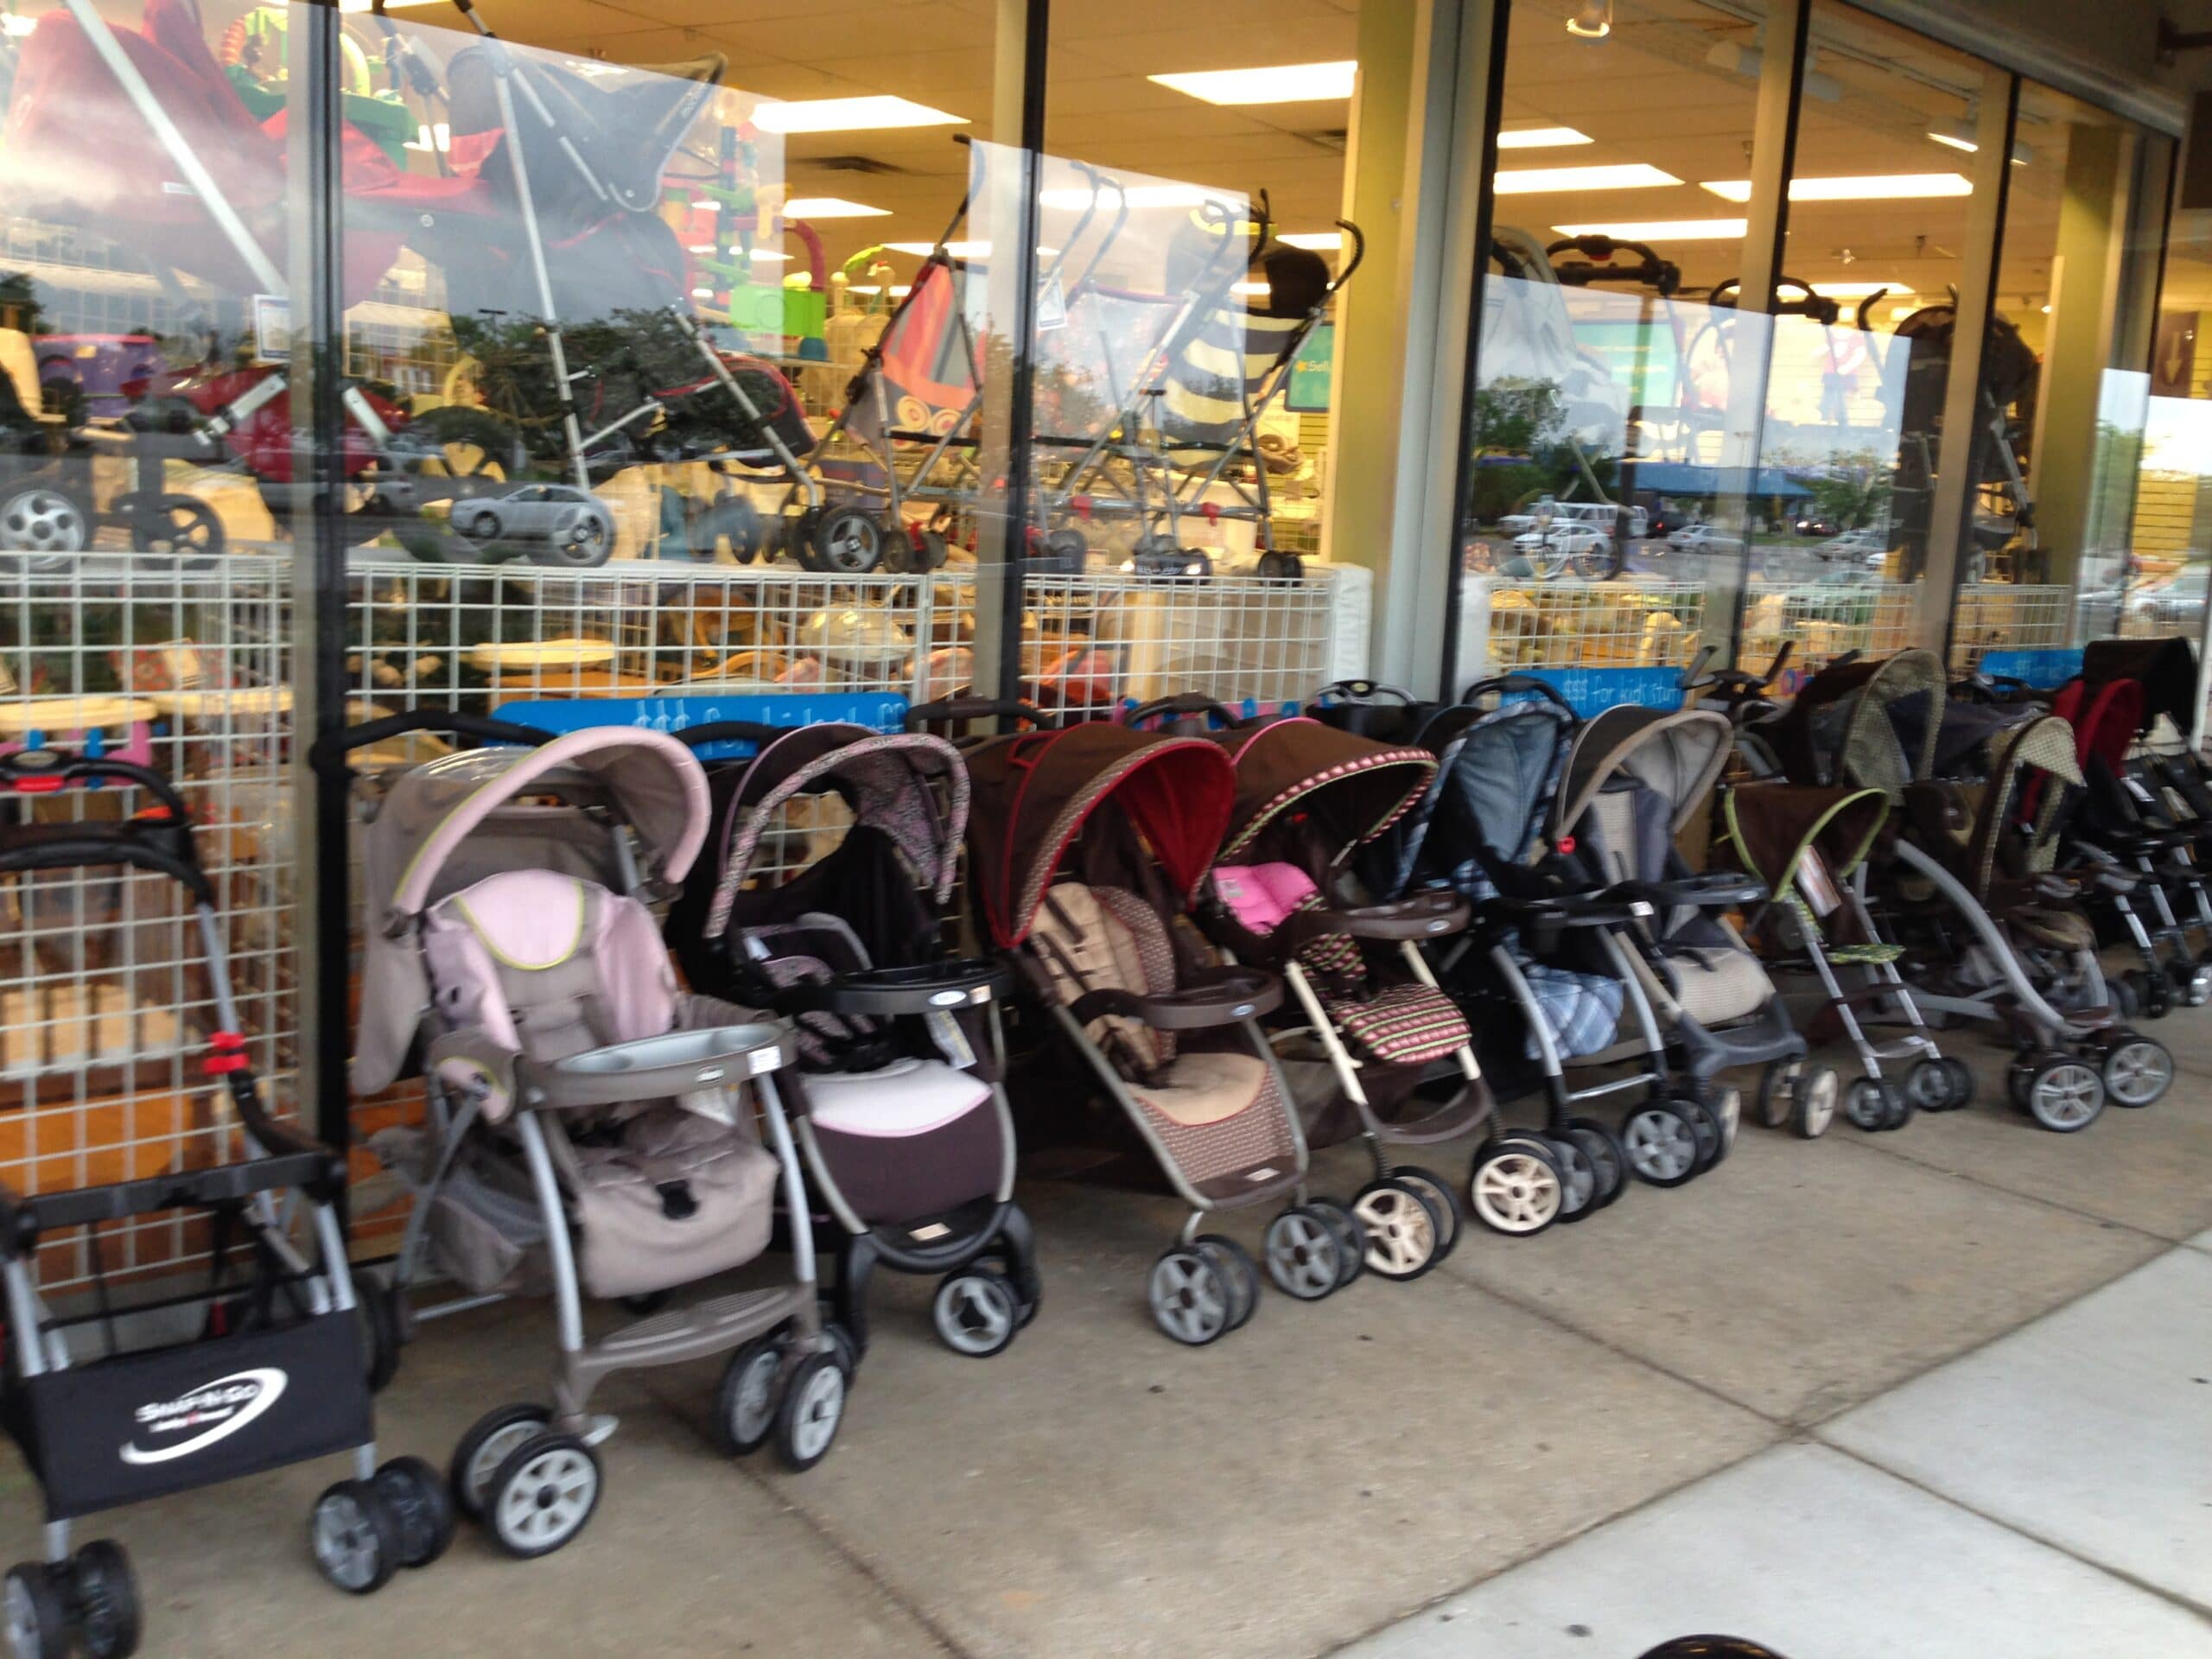 How to Pick a Stroller Your Child Will Love 